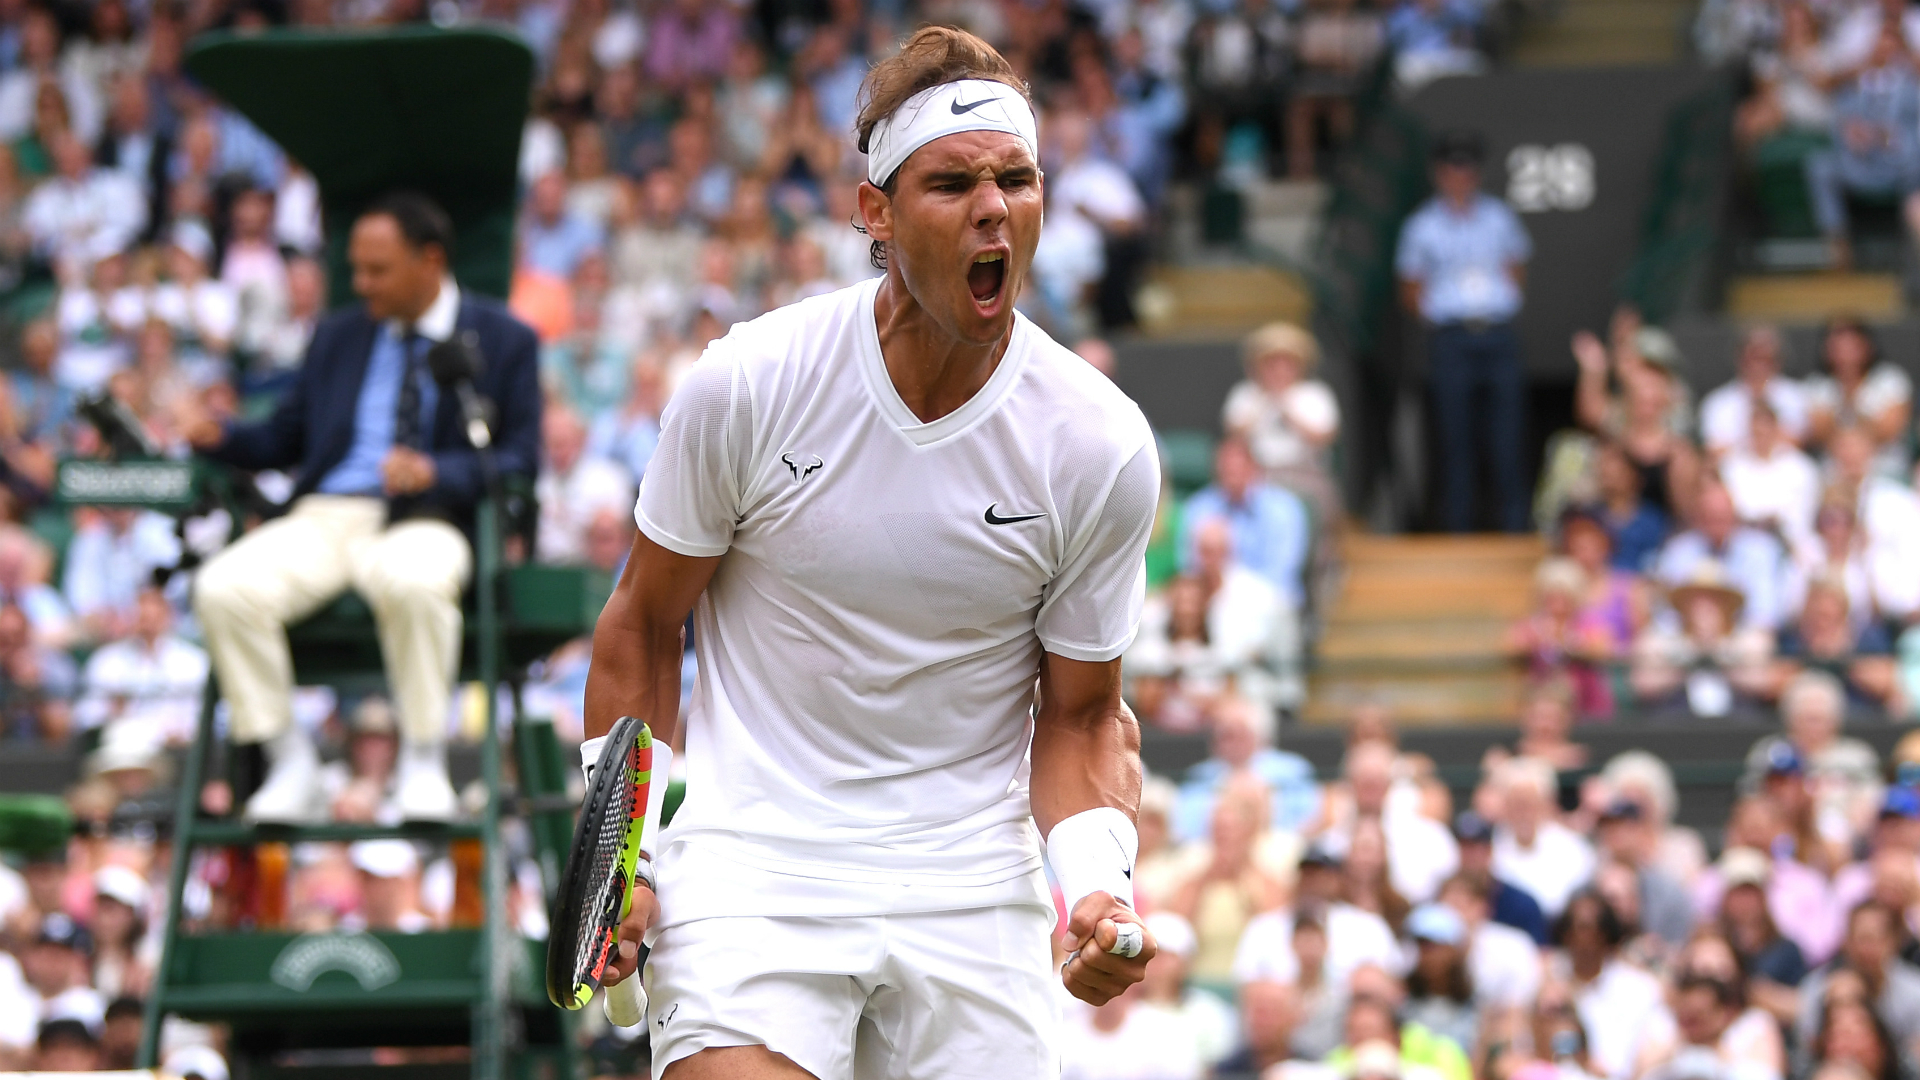 Sam Querrey showed resolve in the first set but was ultimately outclassed by Rafael Nadal, who faces Roger Federer in the Wimbledon semis.